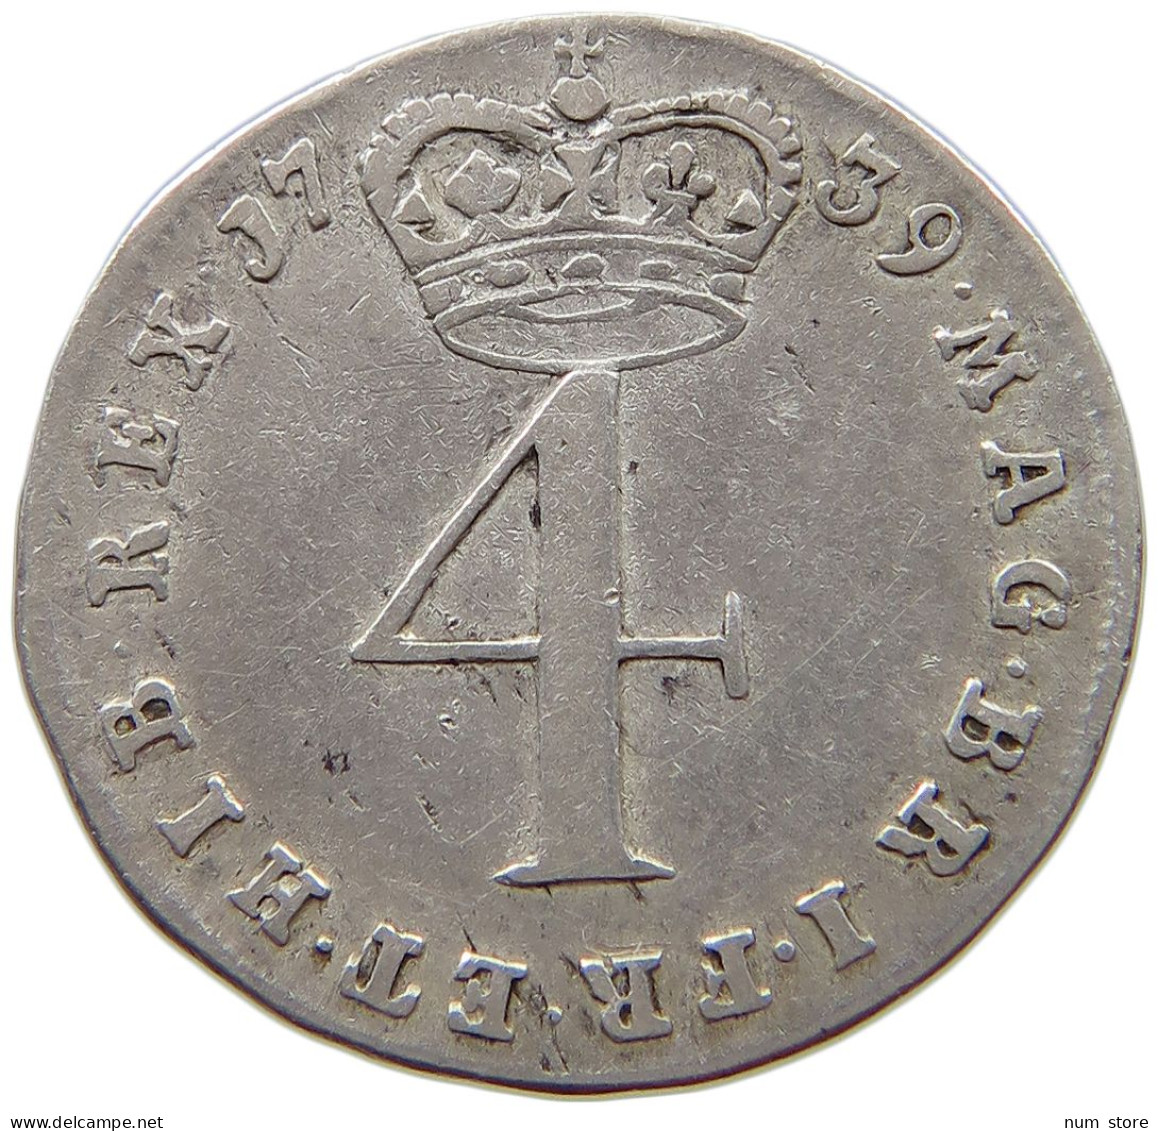 GREAT BRITAIN 4 PENCE 1739 George II. 1727-1760. MAUNDY #t148 0605 - F. 4 Pence/ Groat